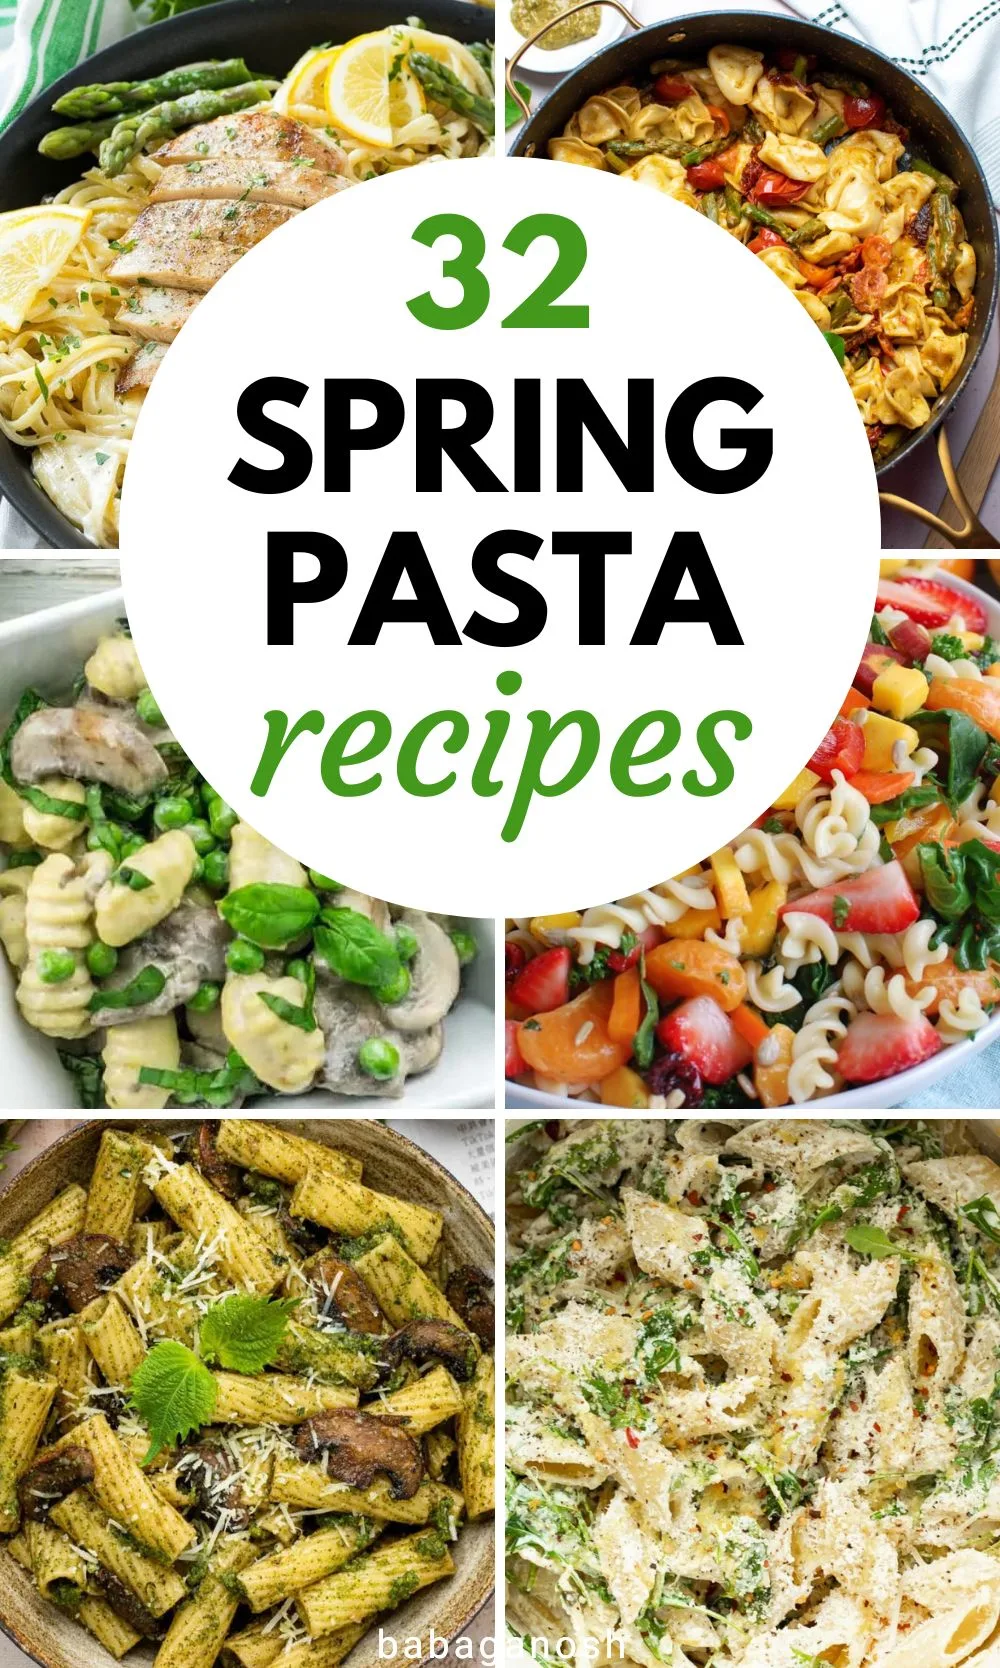 Pinterest graphic with text that reads "32 Spring Pasta Recipes" and a collage of pasta dishes.